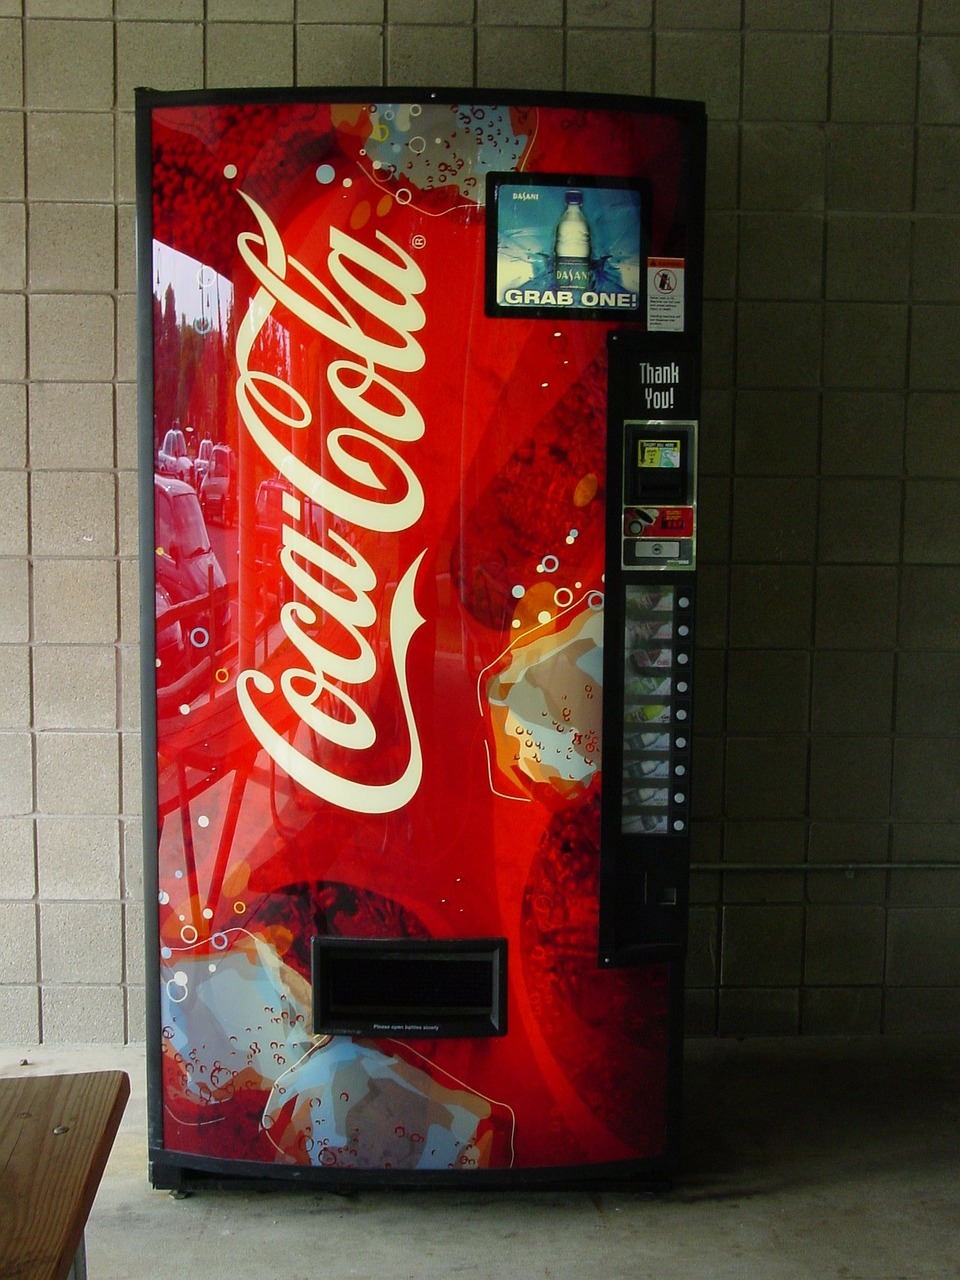 Questions To Ask When Buying a Vending Machine (16 Questions)